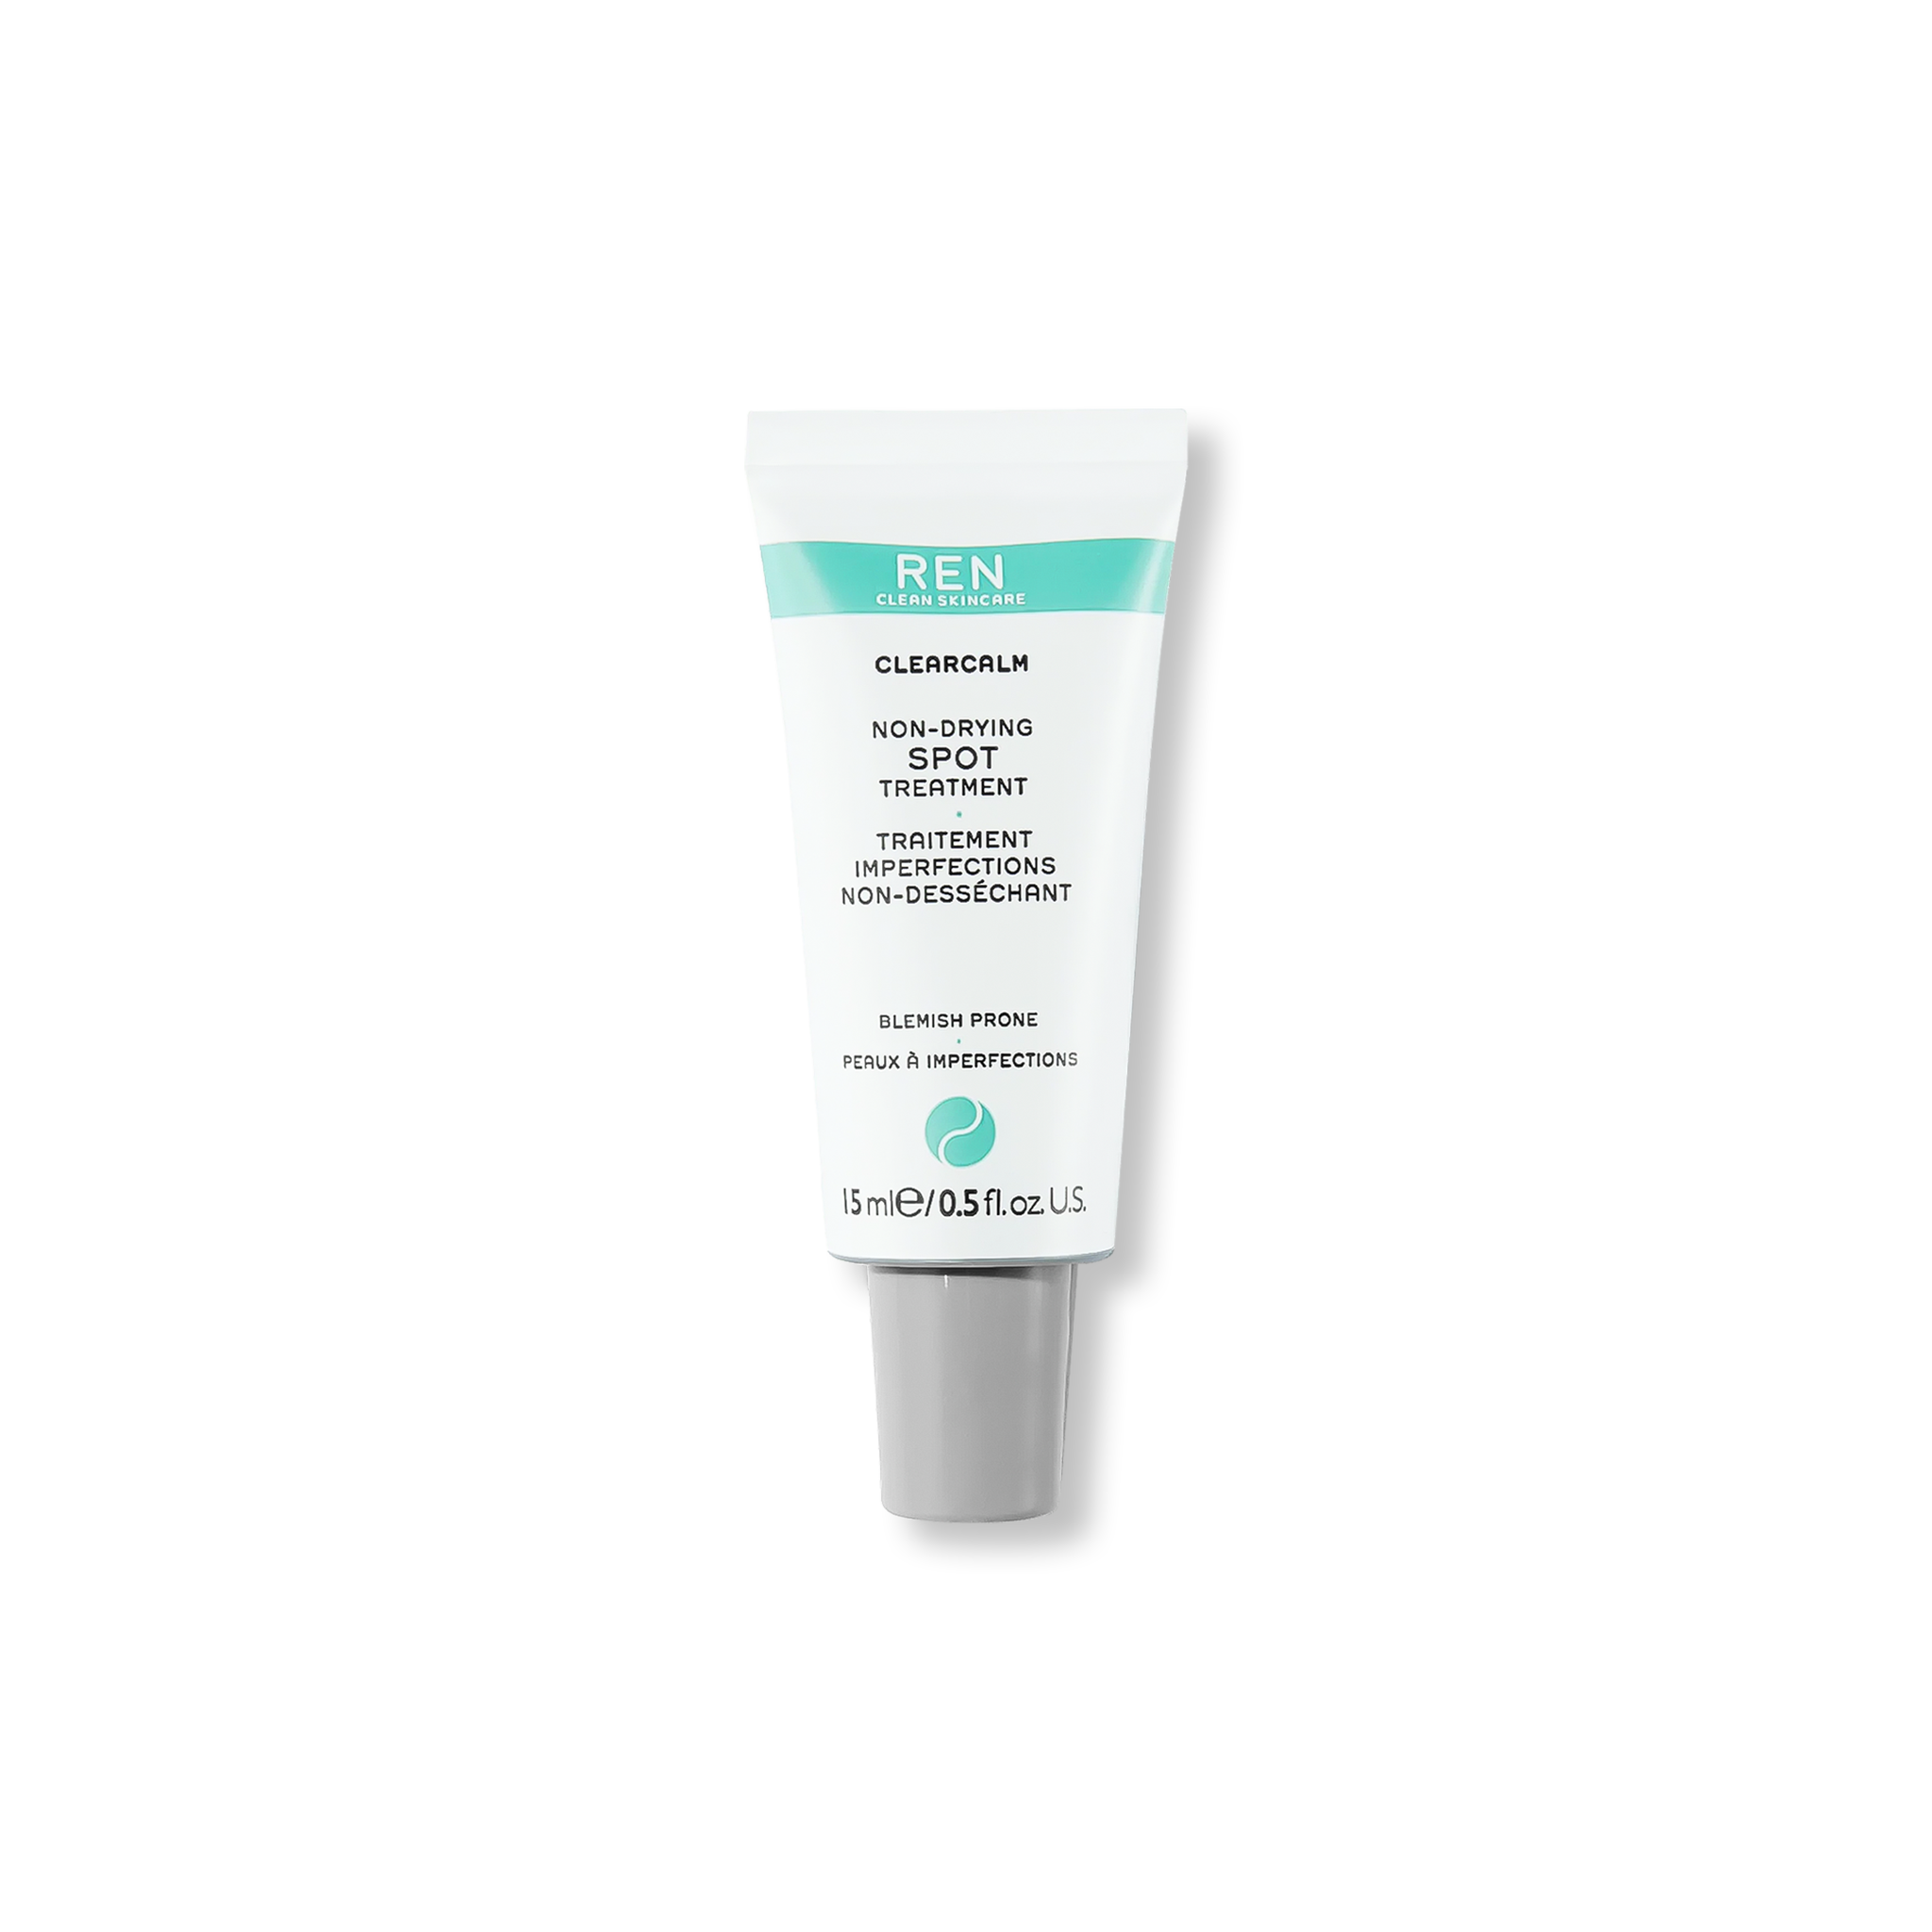 REN Clearcalm Non Drying Acne Treatment